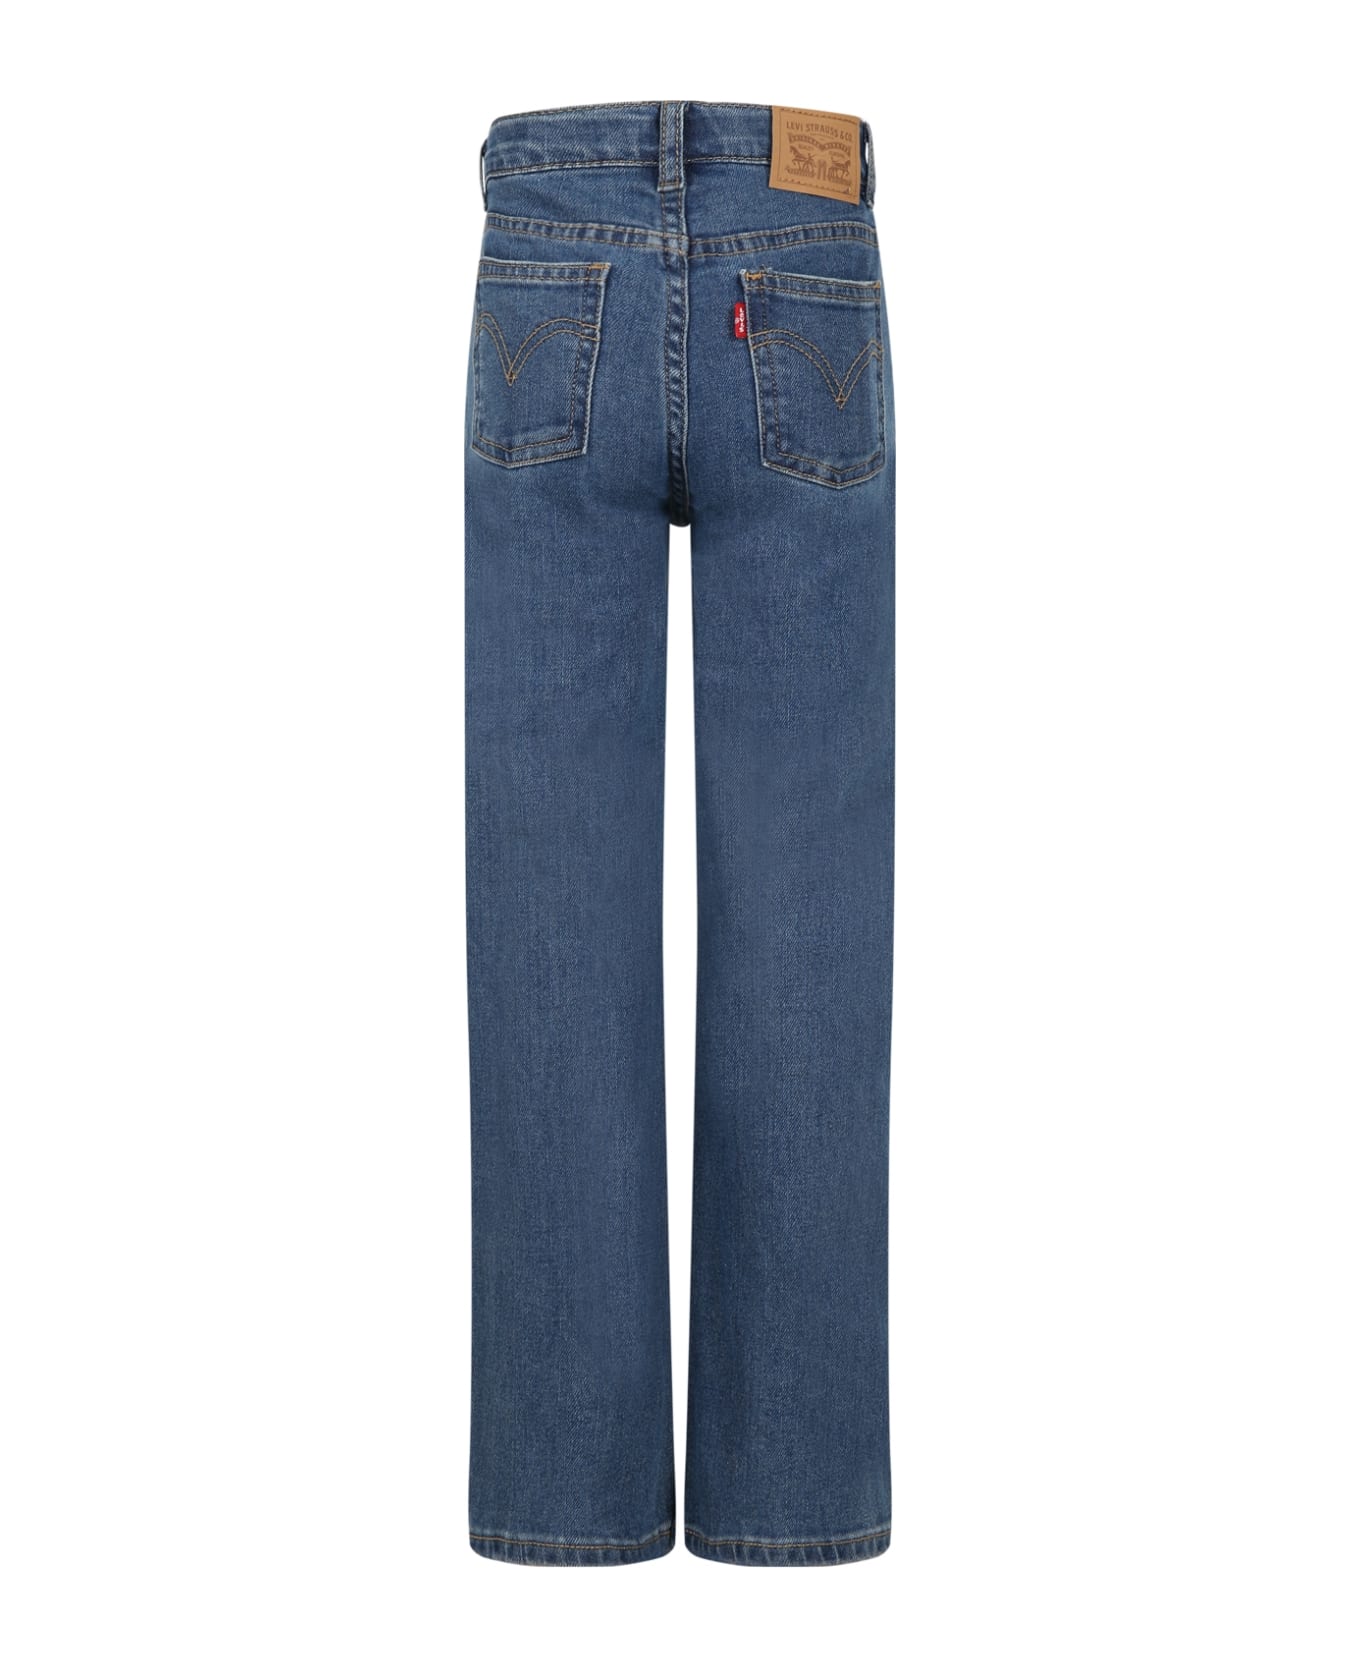 Levi's Blue Jeans For Girl With Logo - Denim